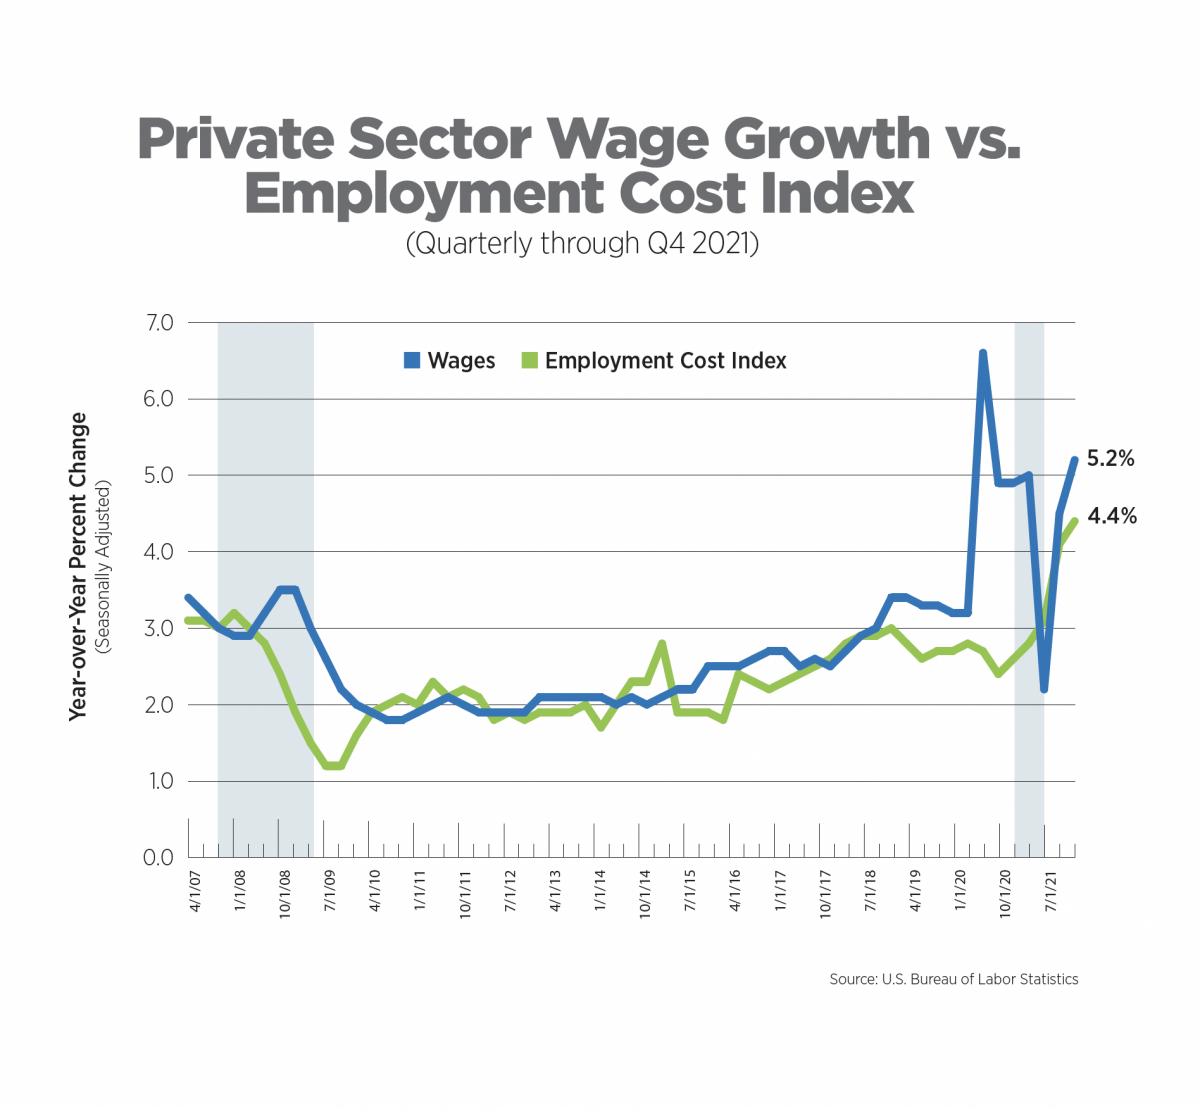 private sector wage growth vs. employment cost index, quarterly through q4 2021